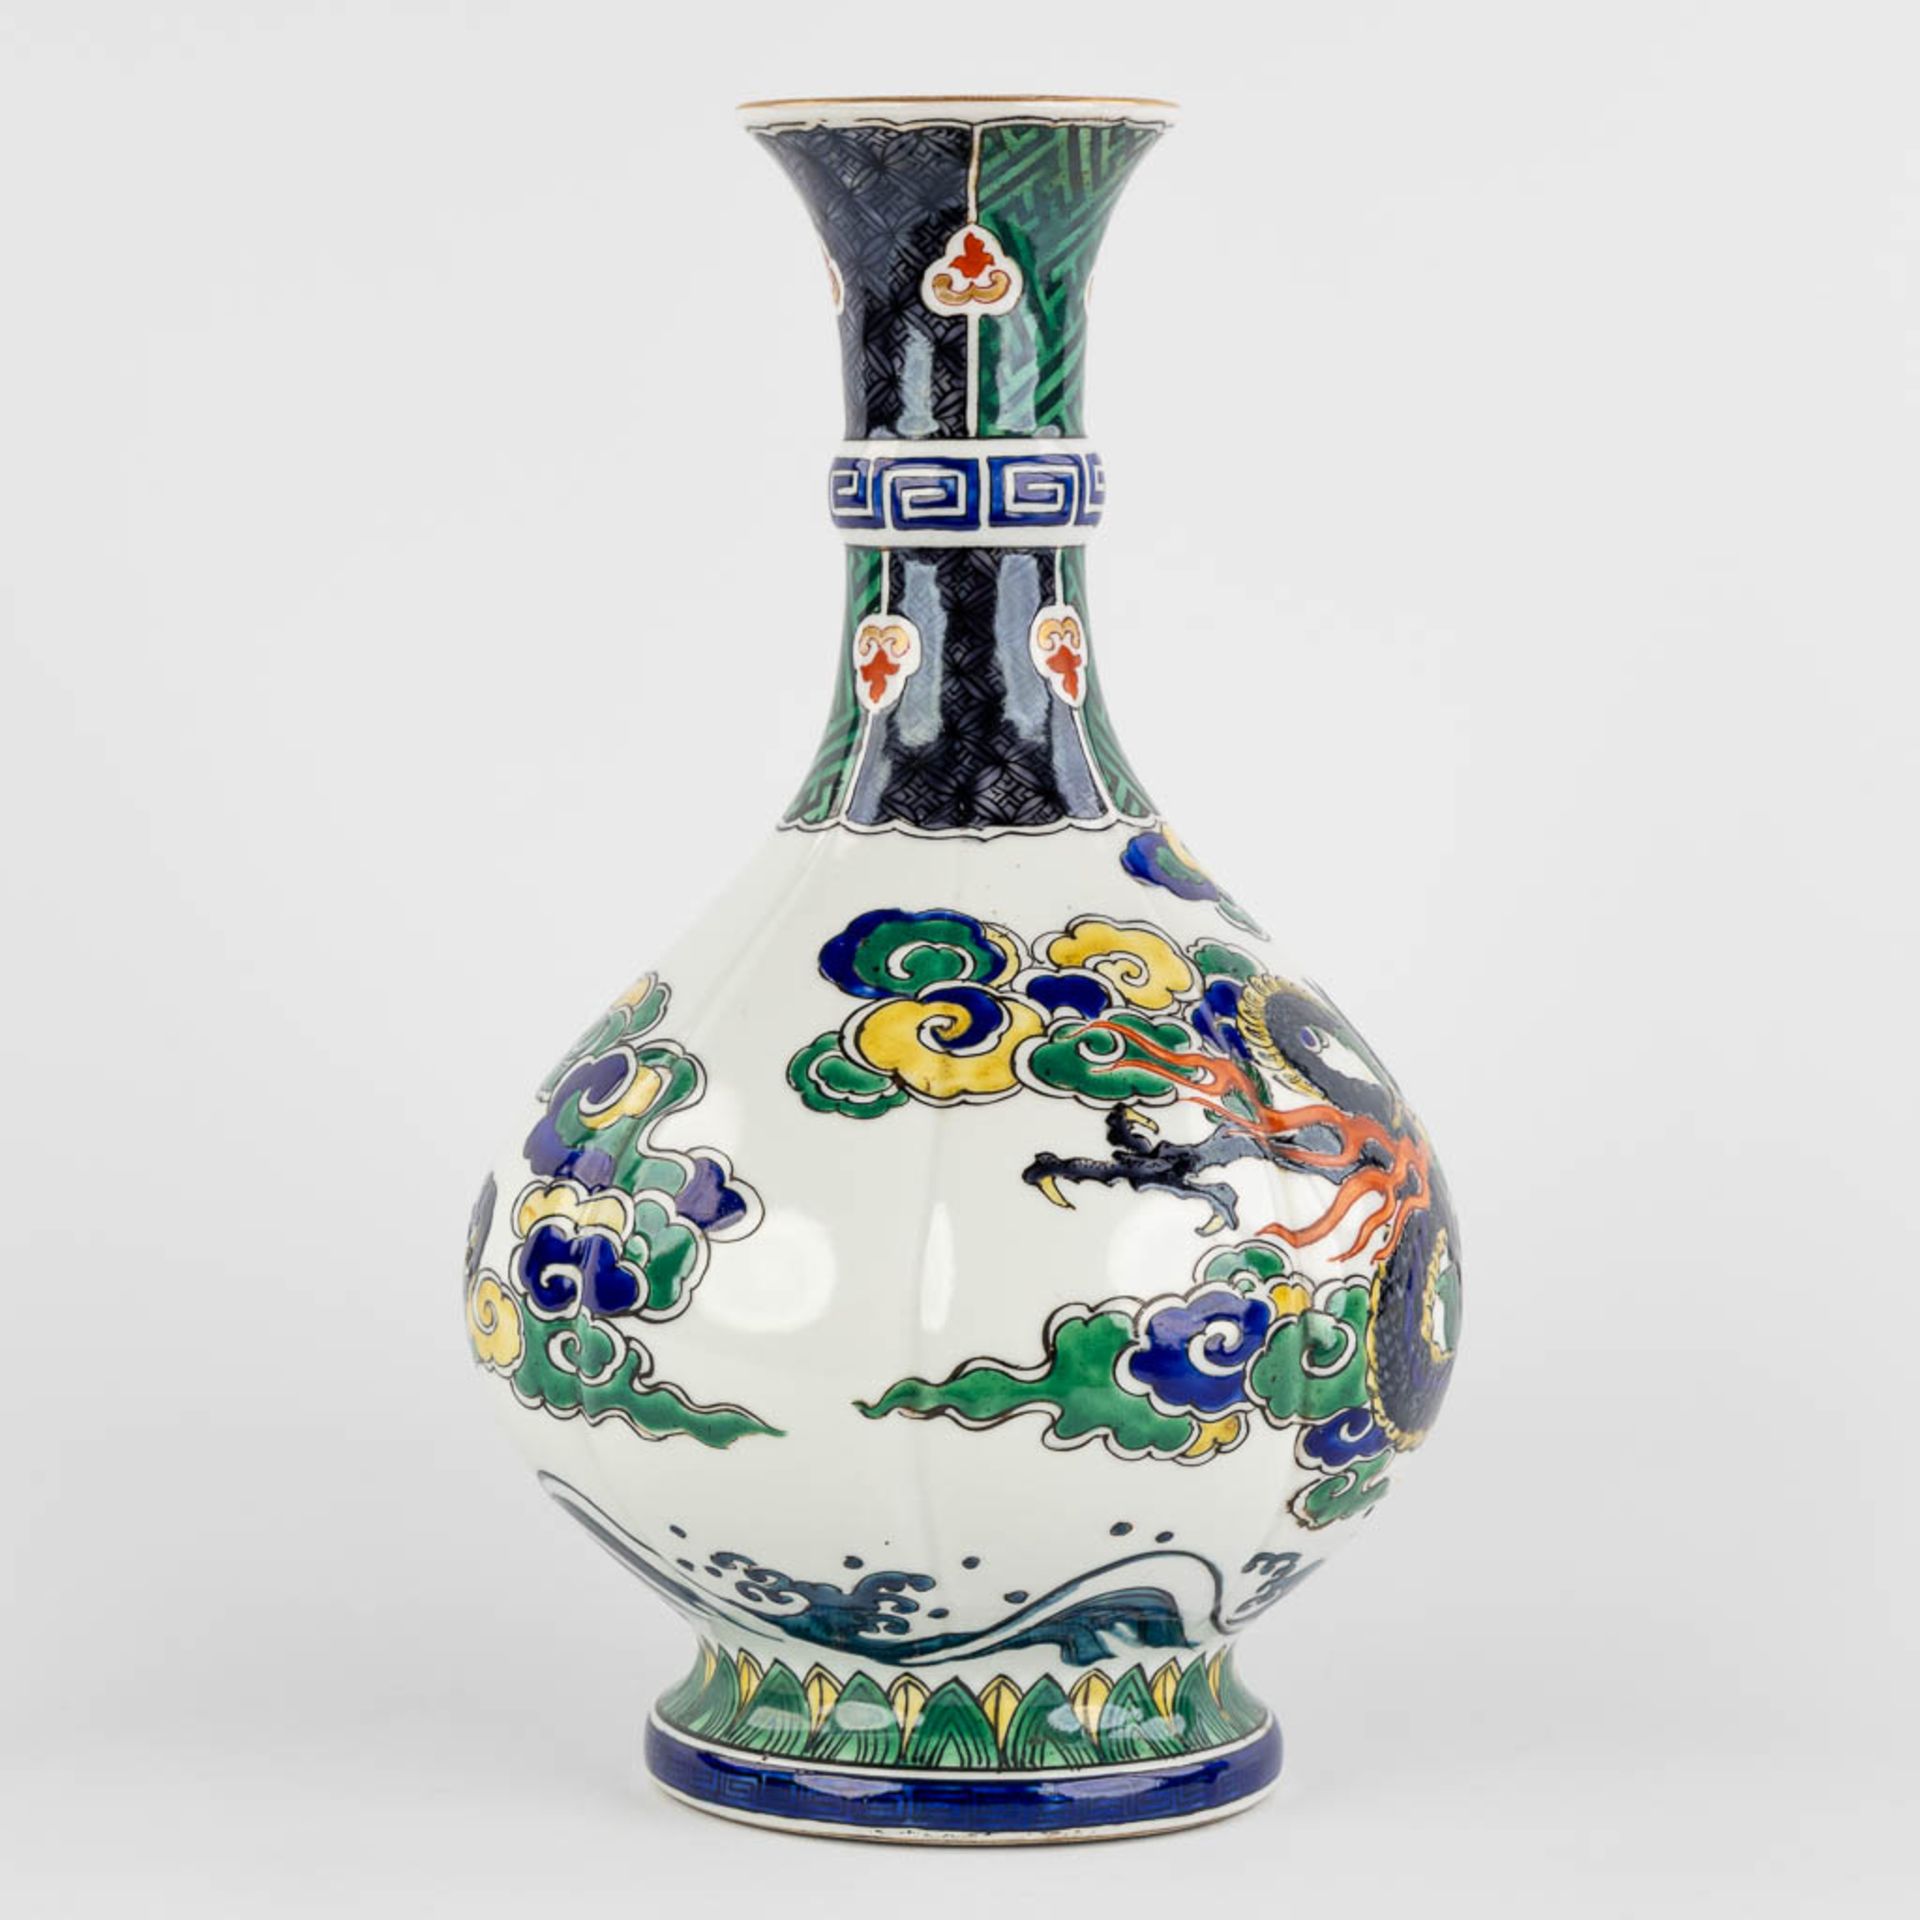 An antique Japanese vase with a three clawed dragon decor, 19th C. (H:30 x D:18 cm) - Image 3 of 10